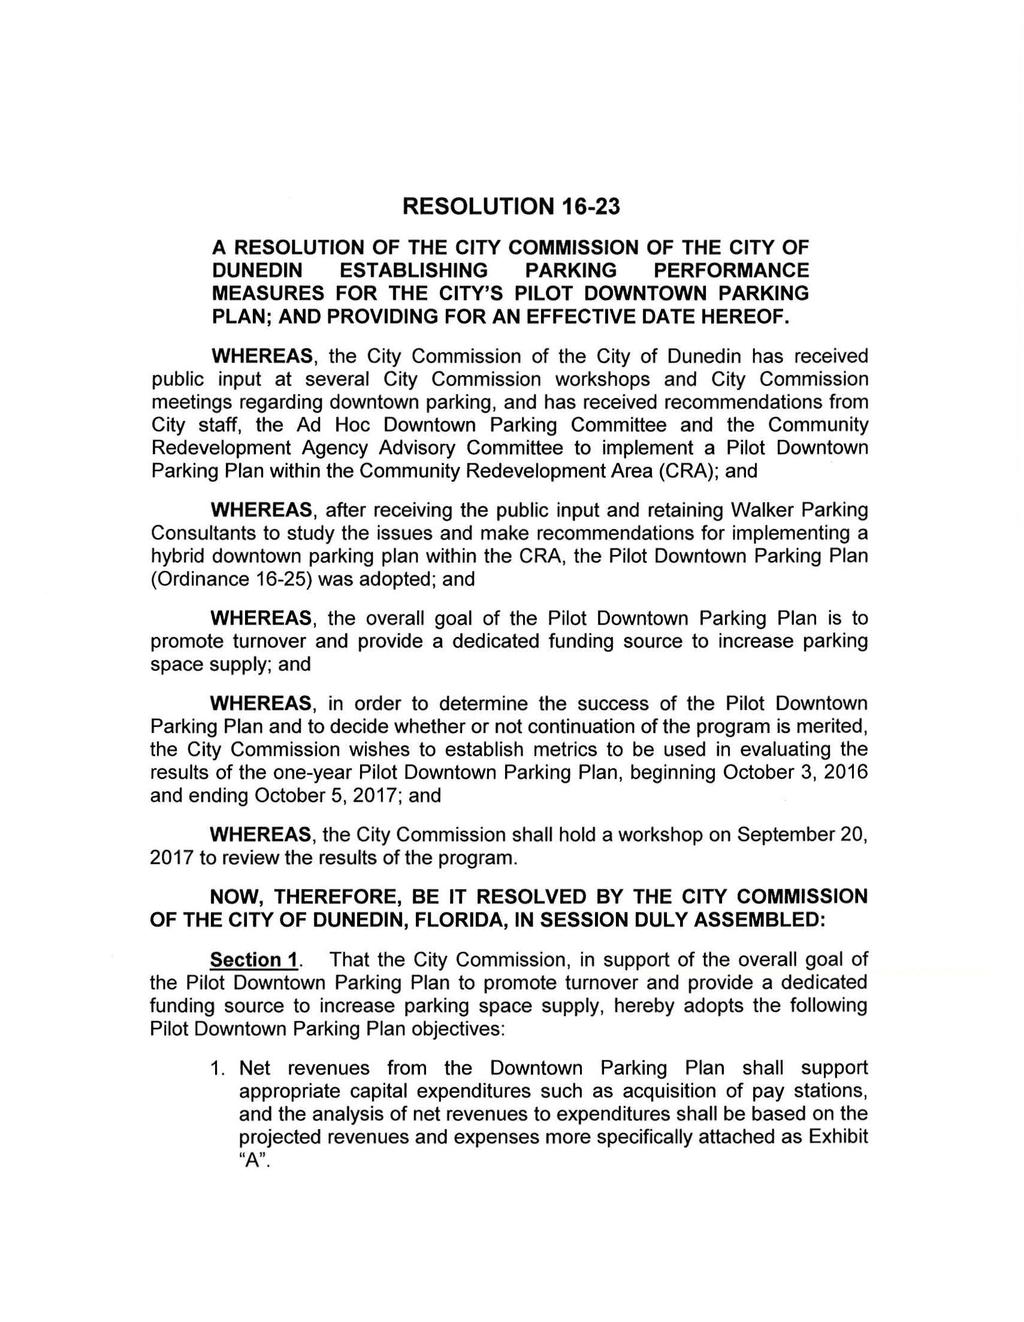 RESOLUTION 16-23 A RESOLUTION OF THE CITY COMMISSION OF THE CITY OF DUNEDIN ESTABLISHING PARKING PERFORMANCE MEASURES FOR THE CITY'S PILOT DOWNTOWN PARKING PLAN; AND PROVIDING FOR AN EFFECTIVE DATE